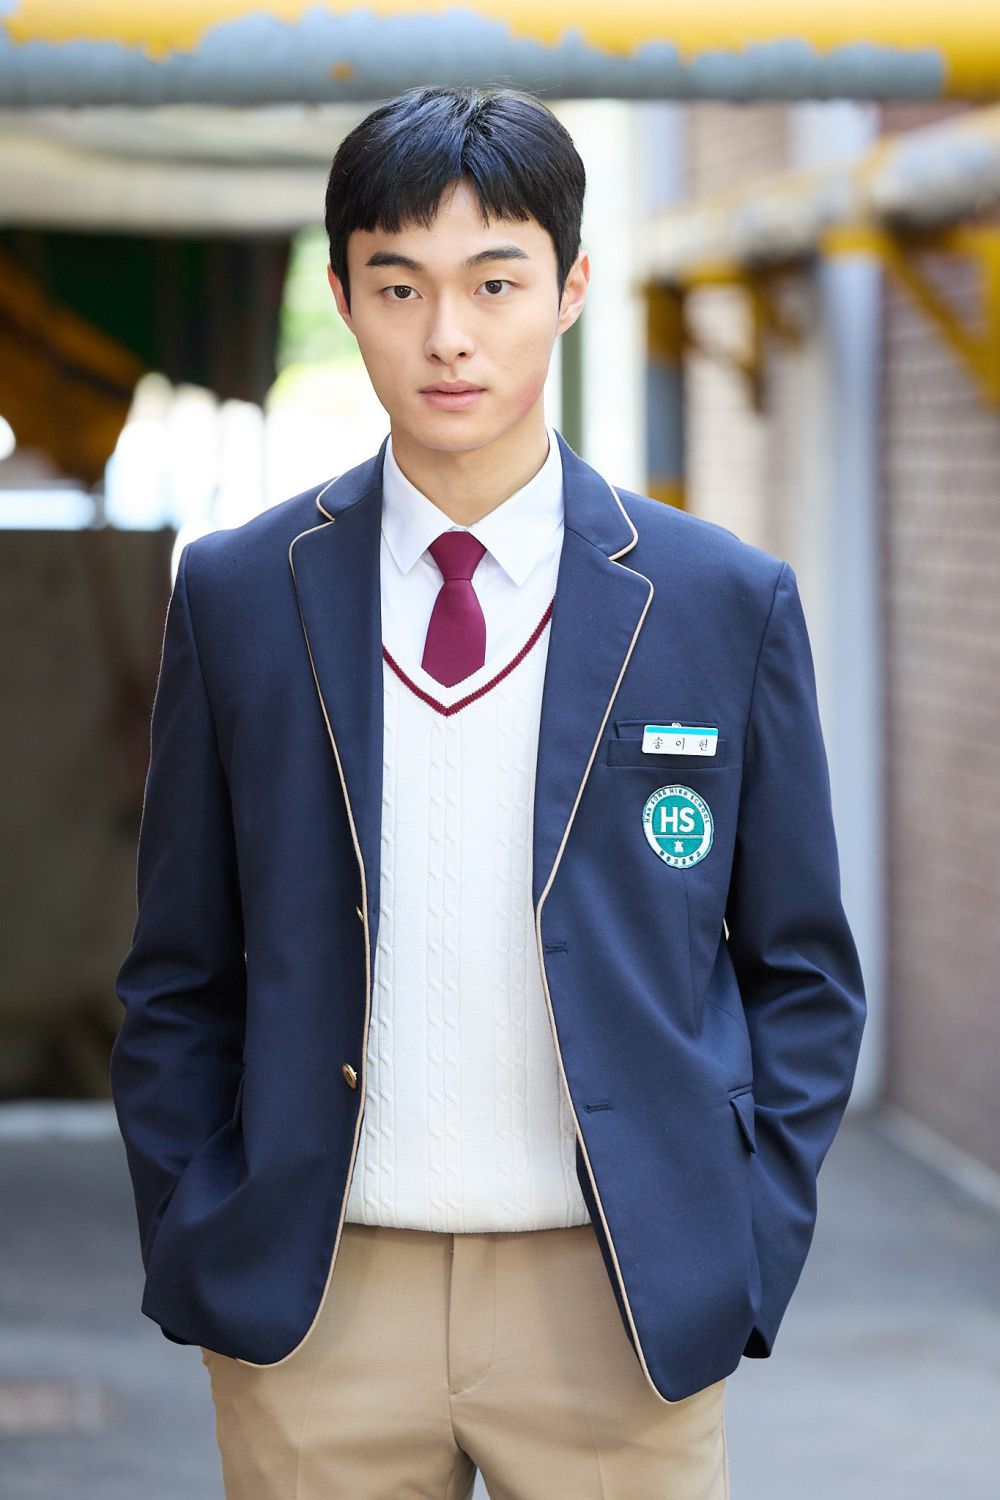 Yoon Chan Young In High School Return Of A Gangster (Instagram.com/Official_Jopog)